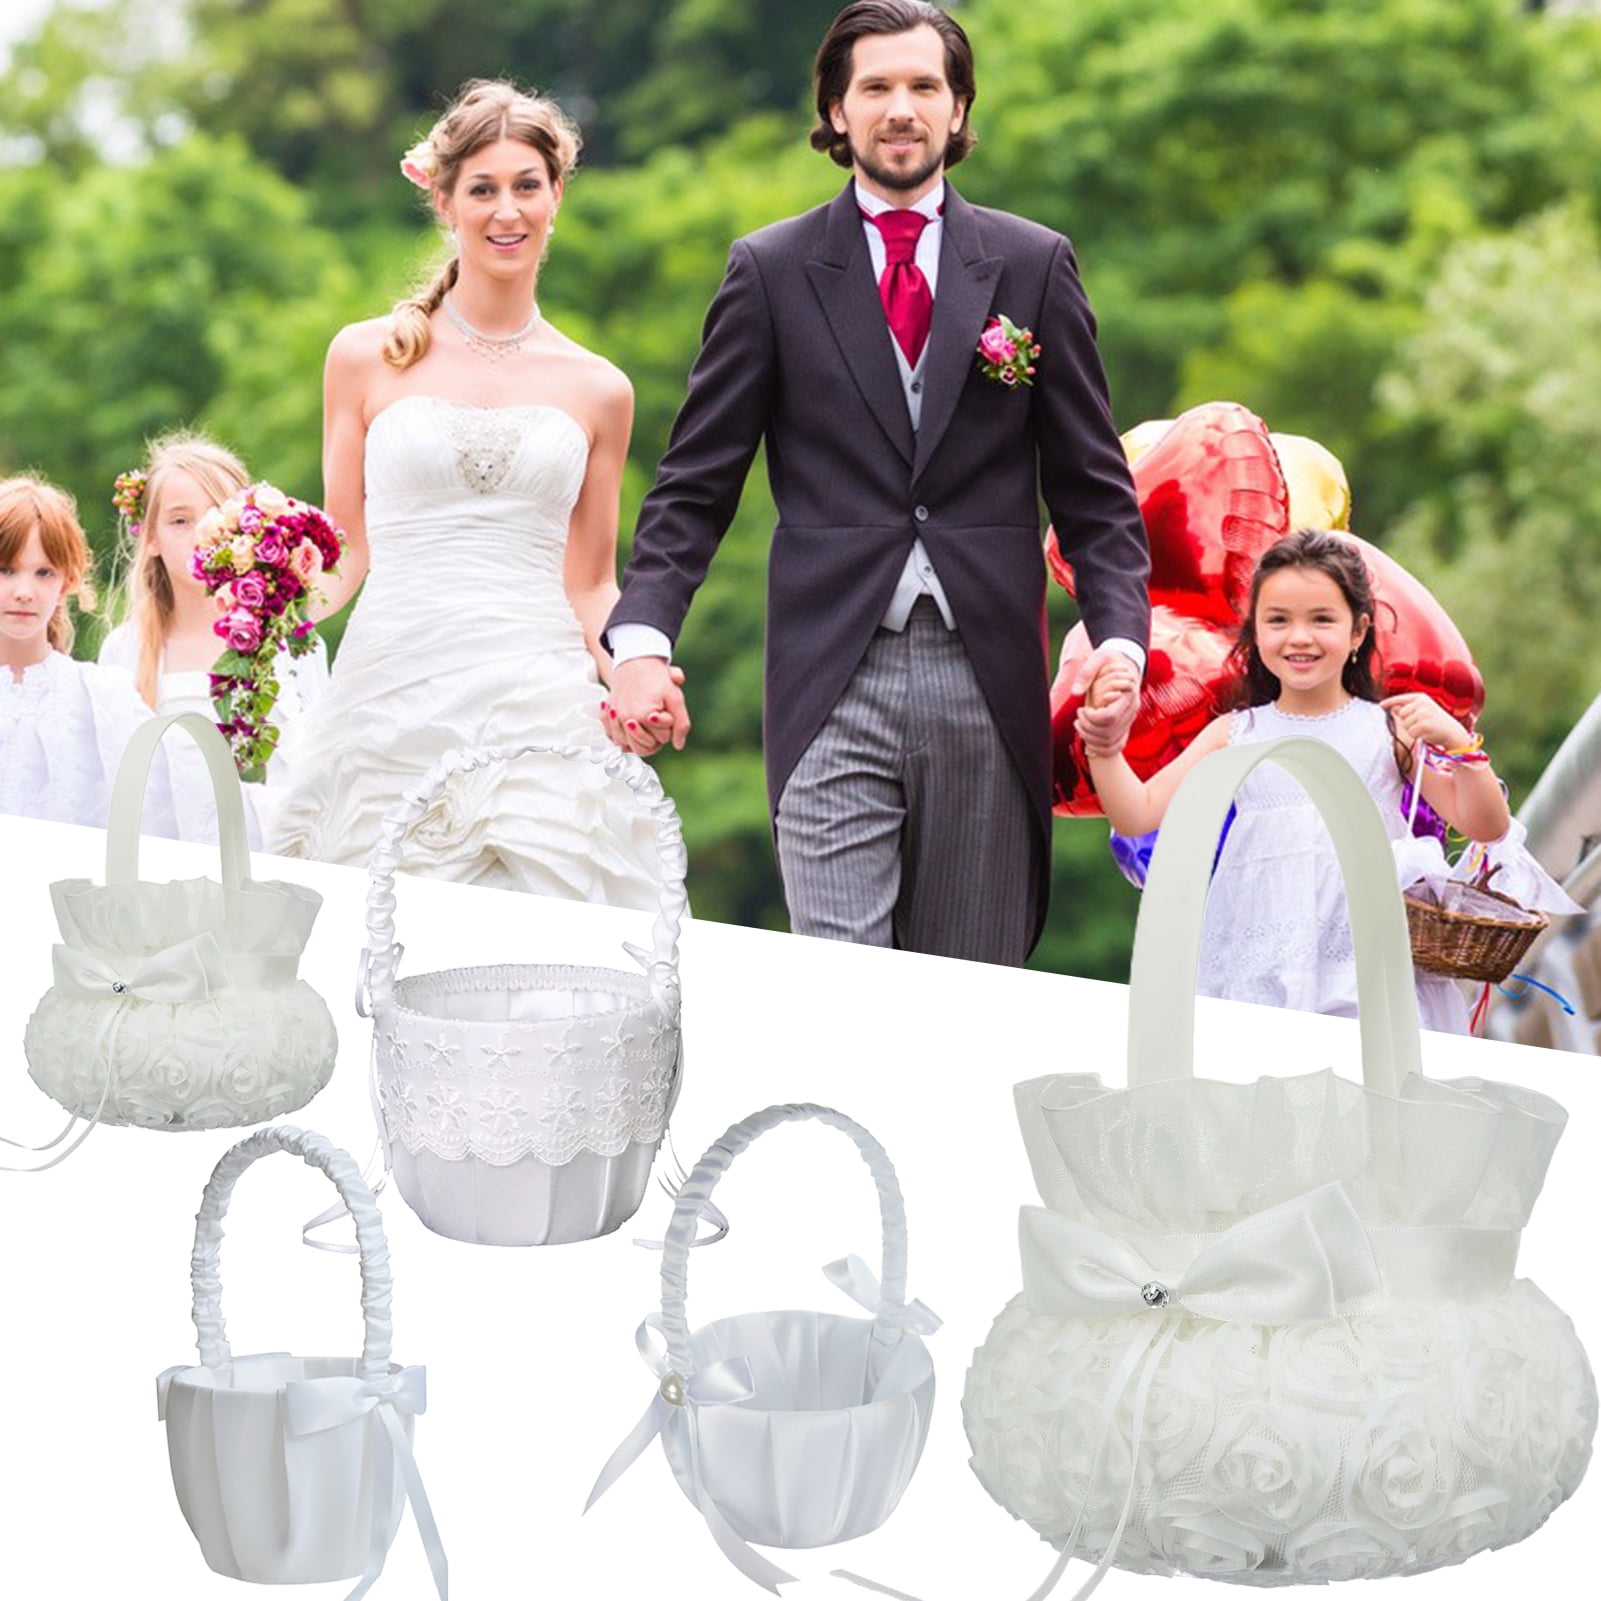 Romantic Satin Lace Bowknot Flower Girl Basket Wedding Ceremony Party White US 